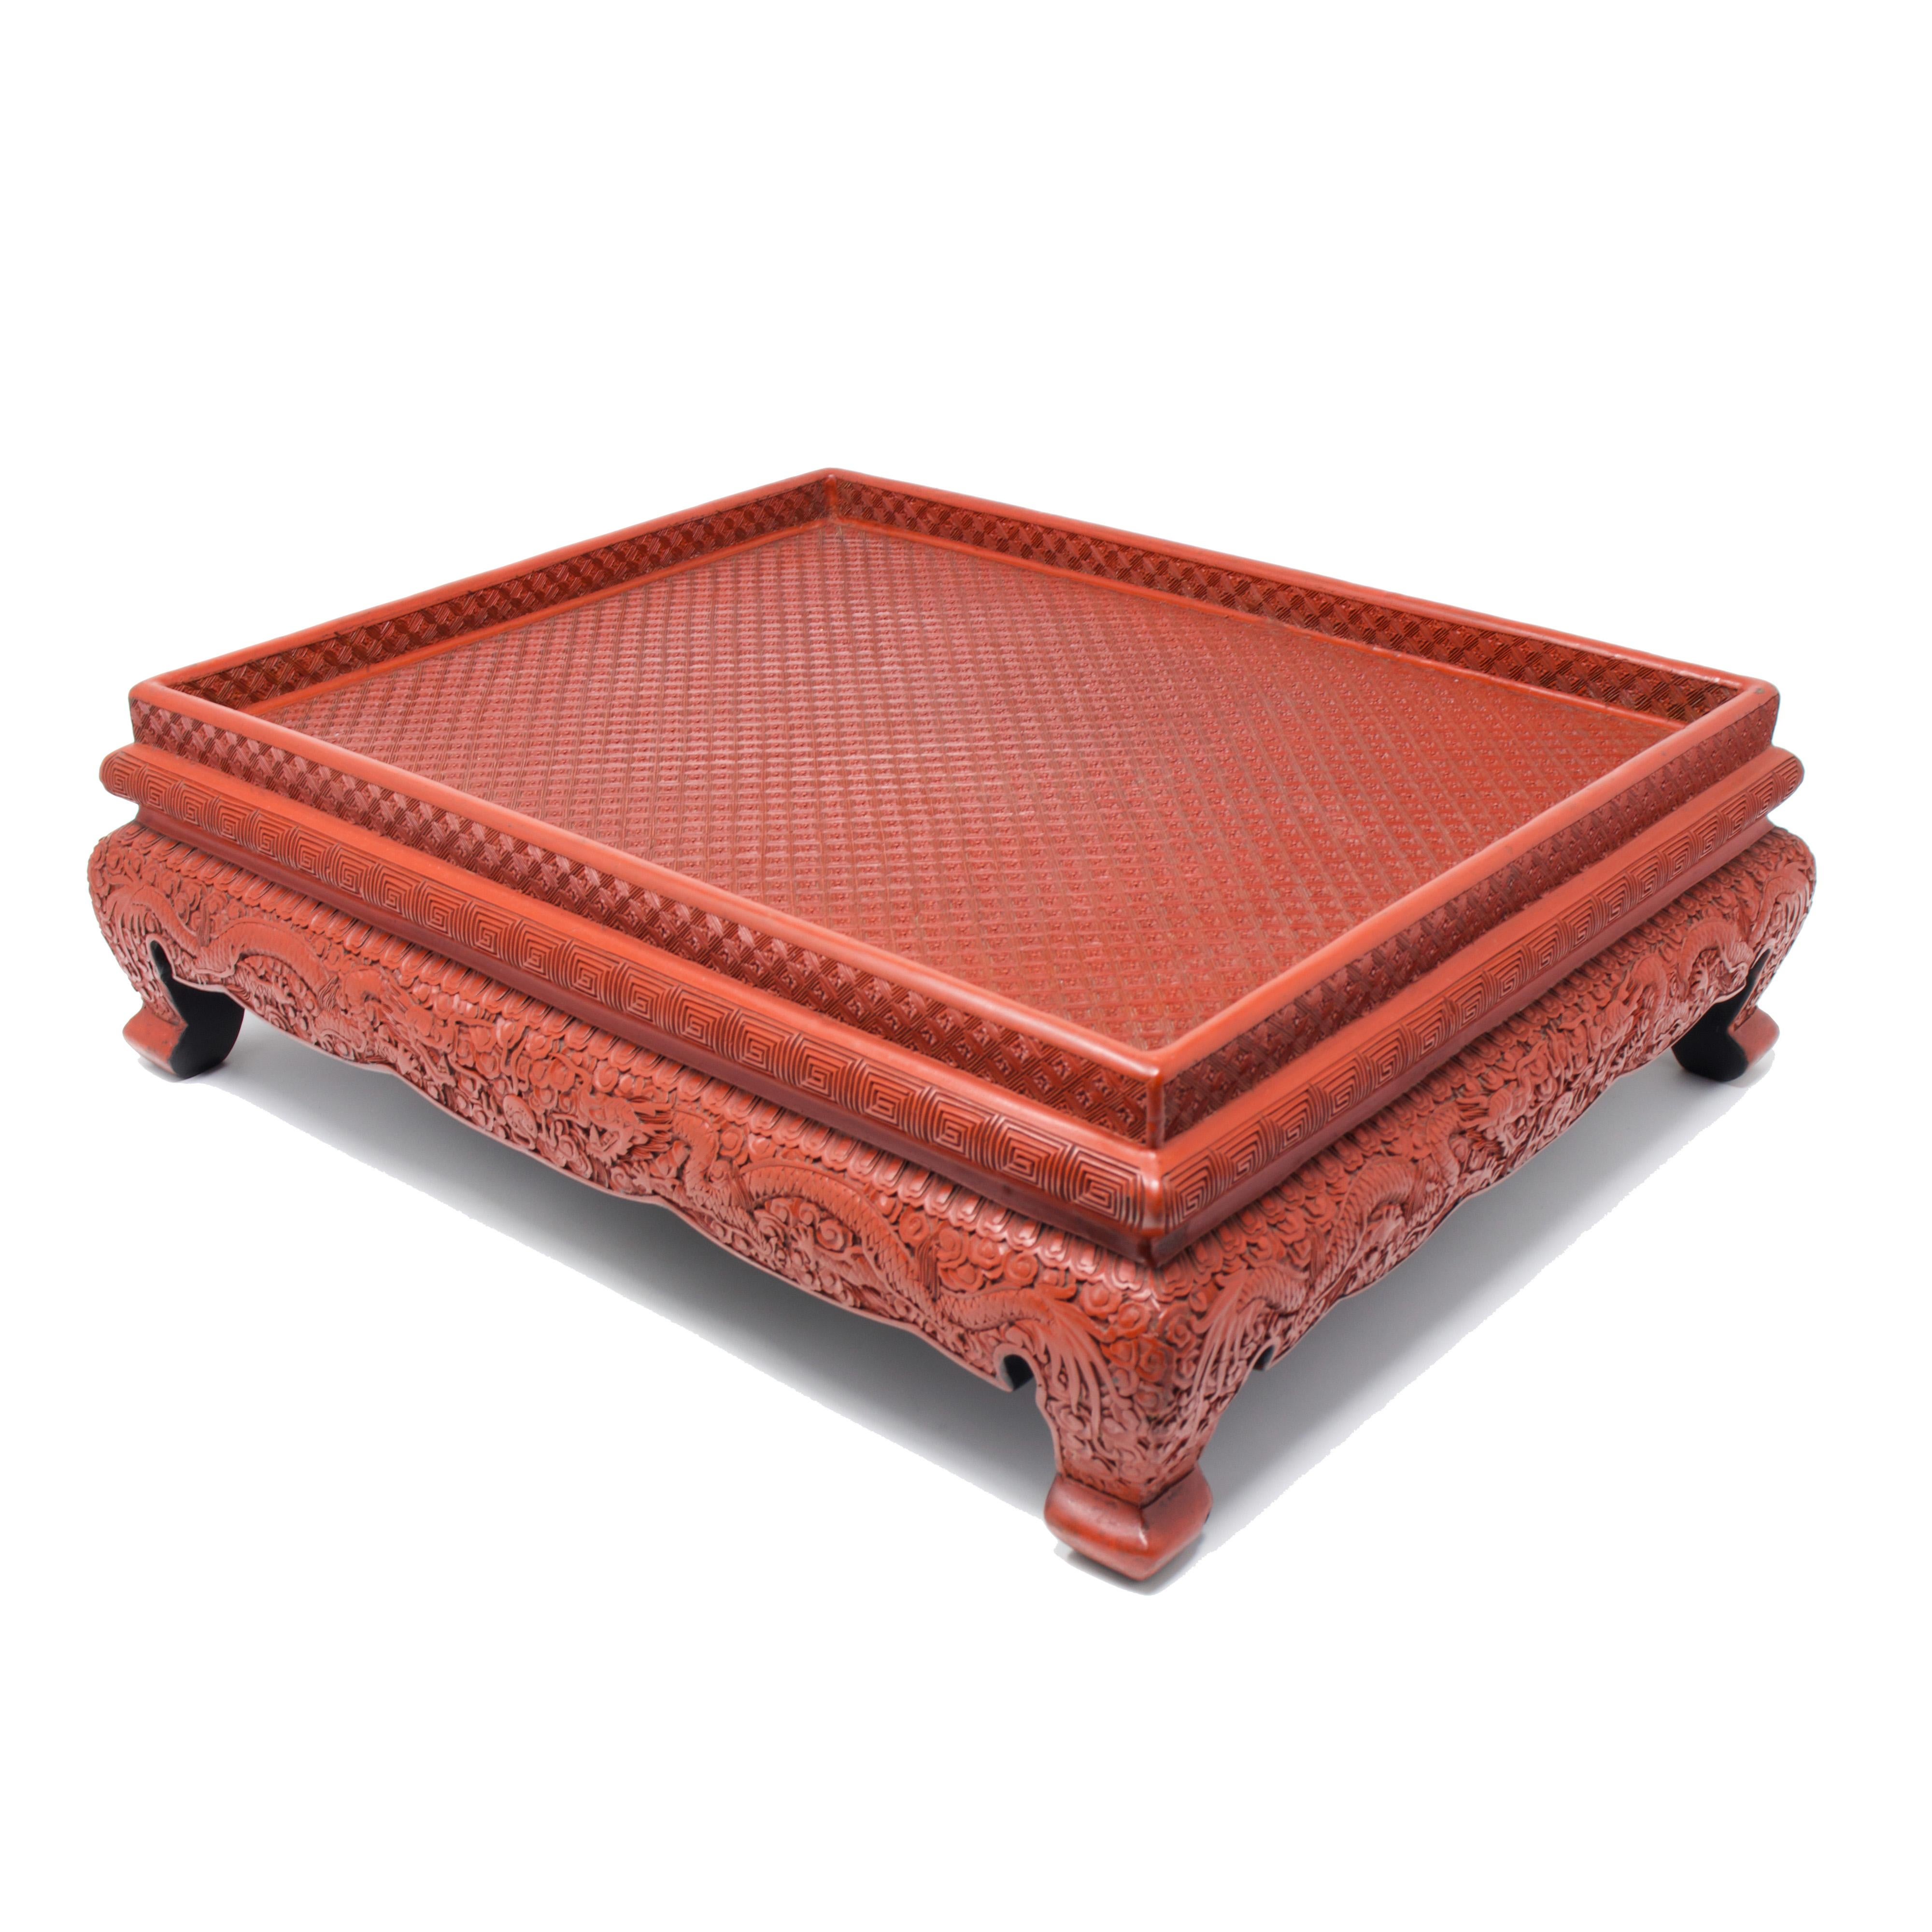 Antique Chinese Cinnabar Lacquer Tray/Stand with Dragon Design In Good Condition For Sale In Point Richmond, CA